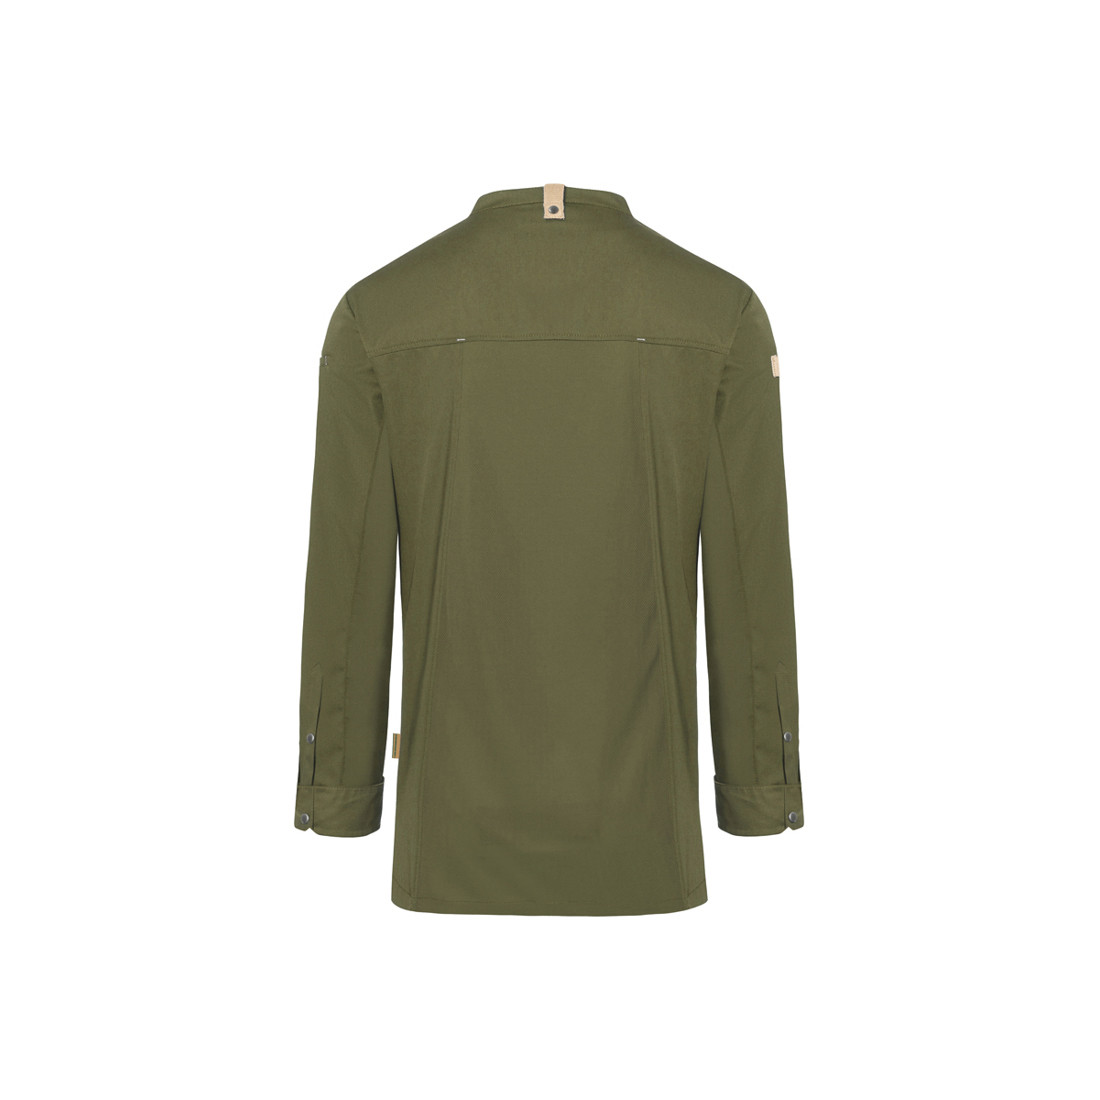 Kochjacke Green-Generation , aus nachhaltigem Material , 72% GRS Certified Recycled Polyester / 28% Conventional Cotton - Arbeitskleidung